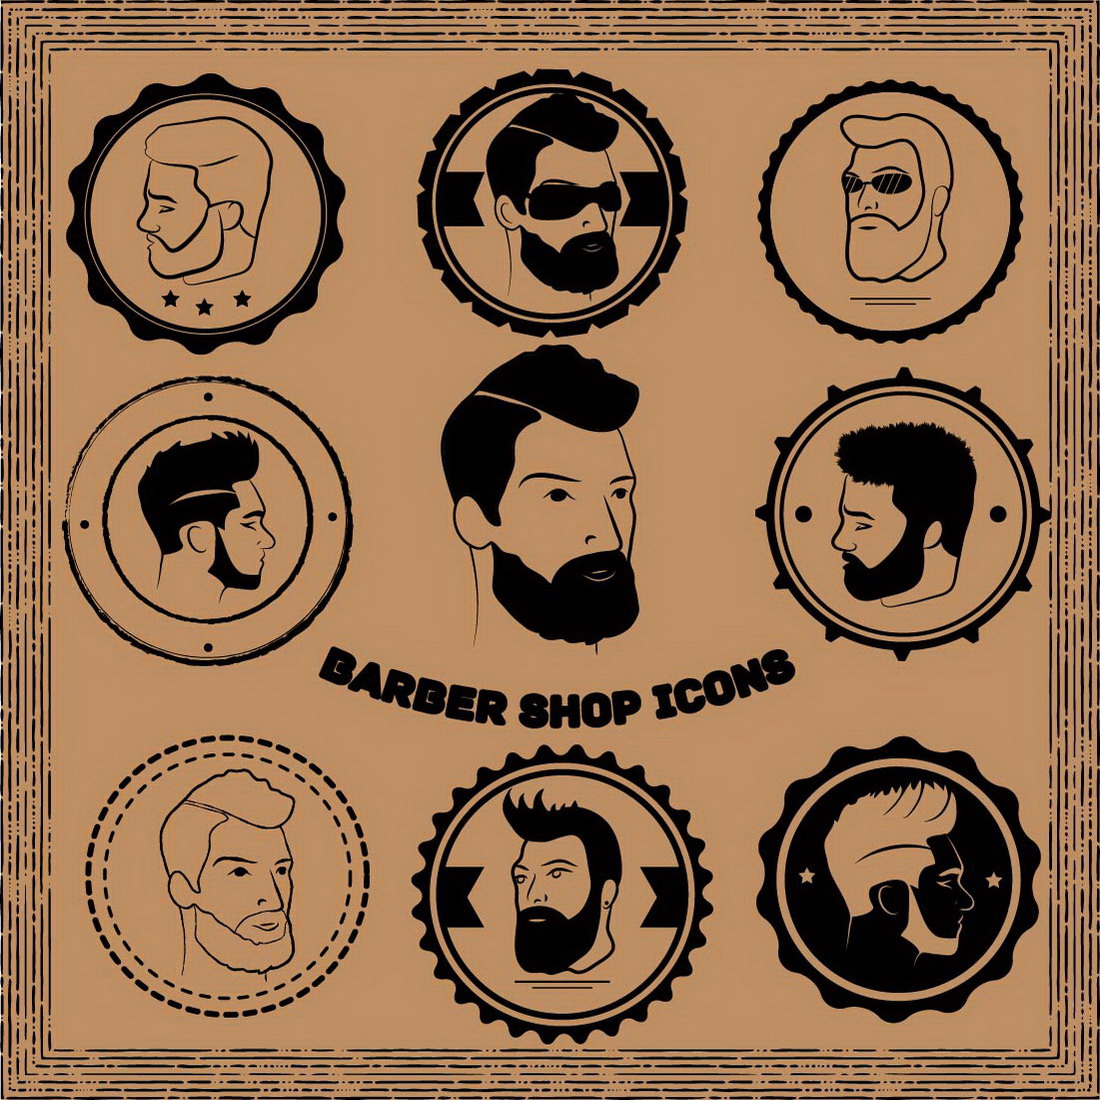 Barber Shop Icons main cover.